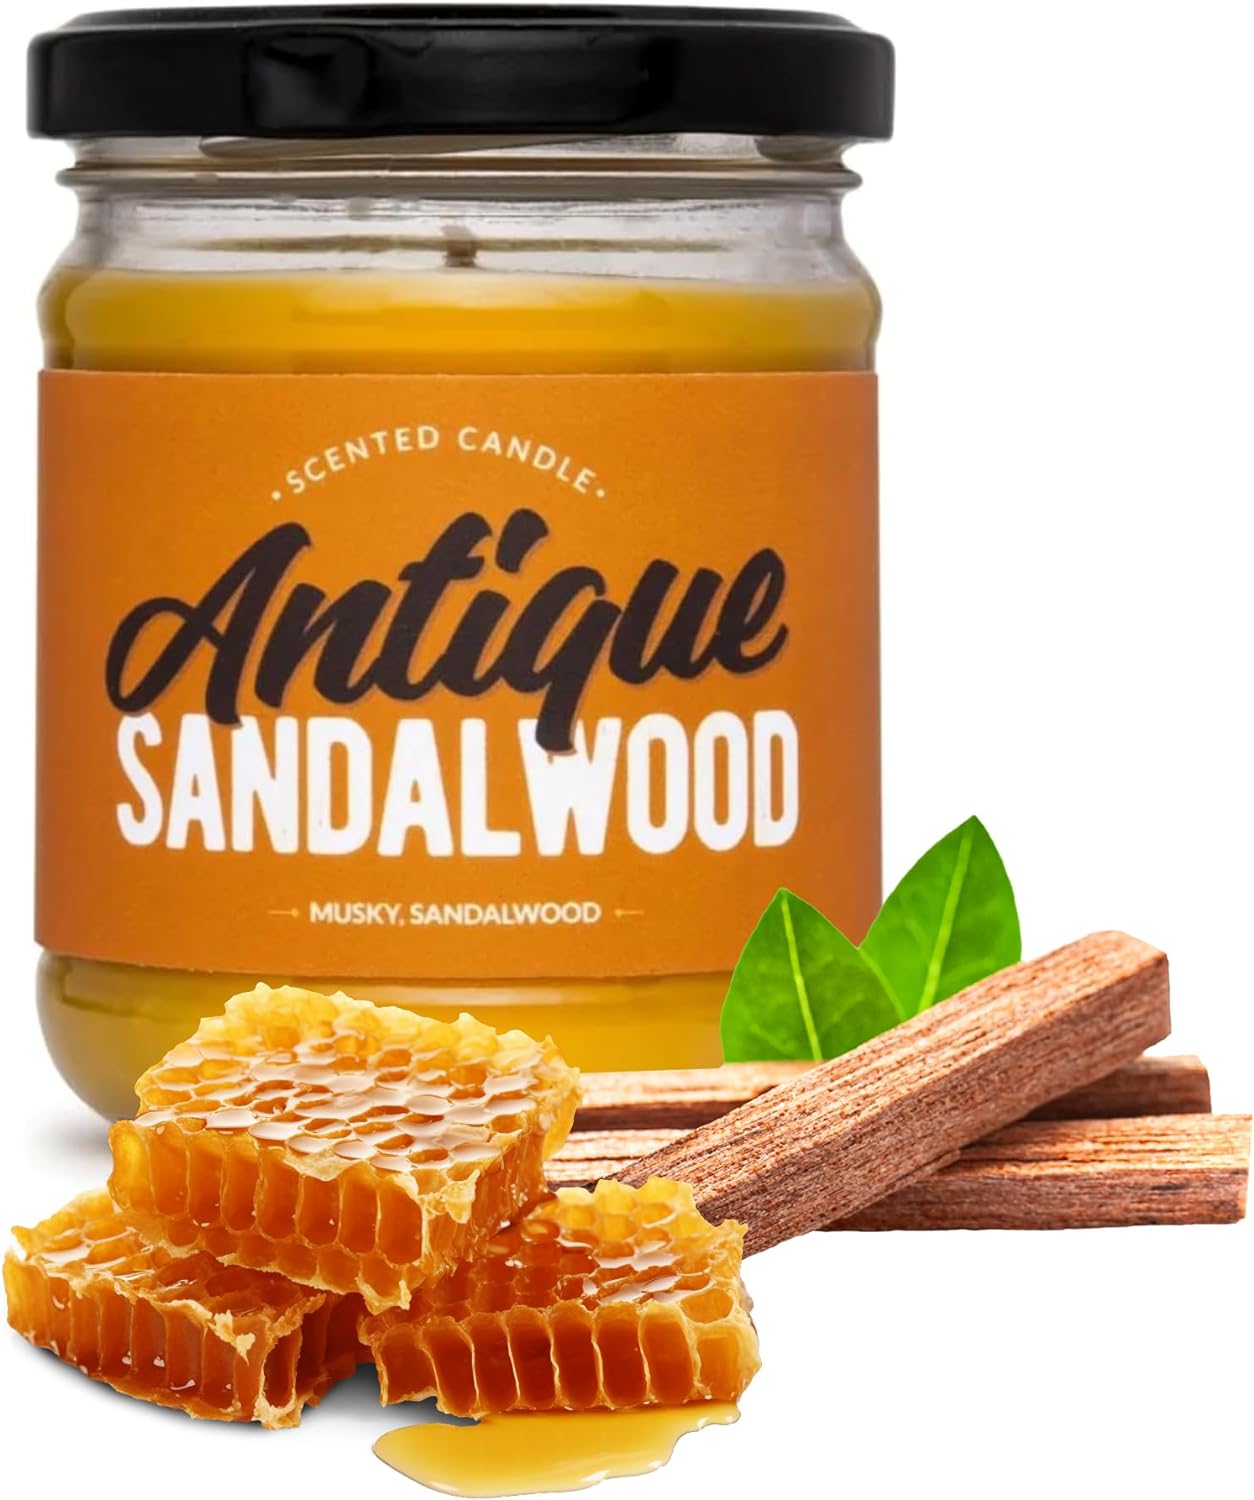 Beeswax Candle "Antique Sandalwood"